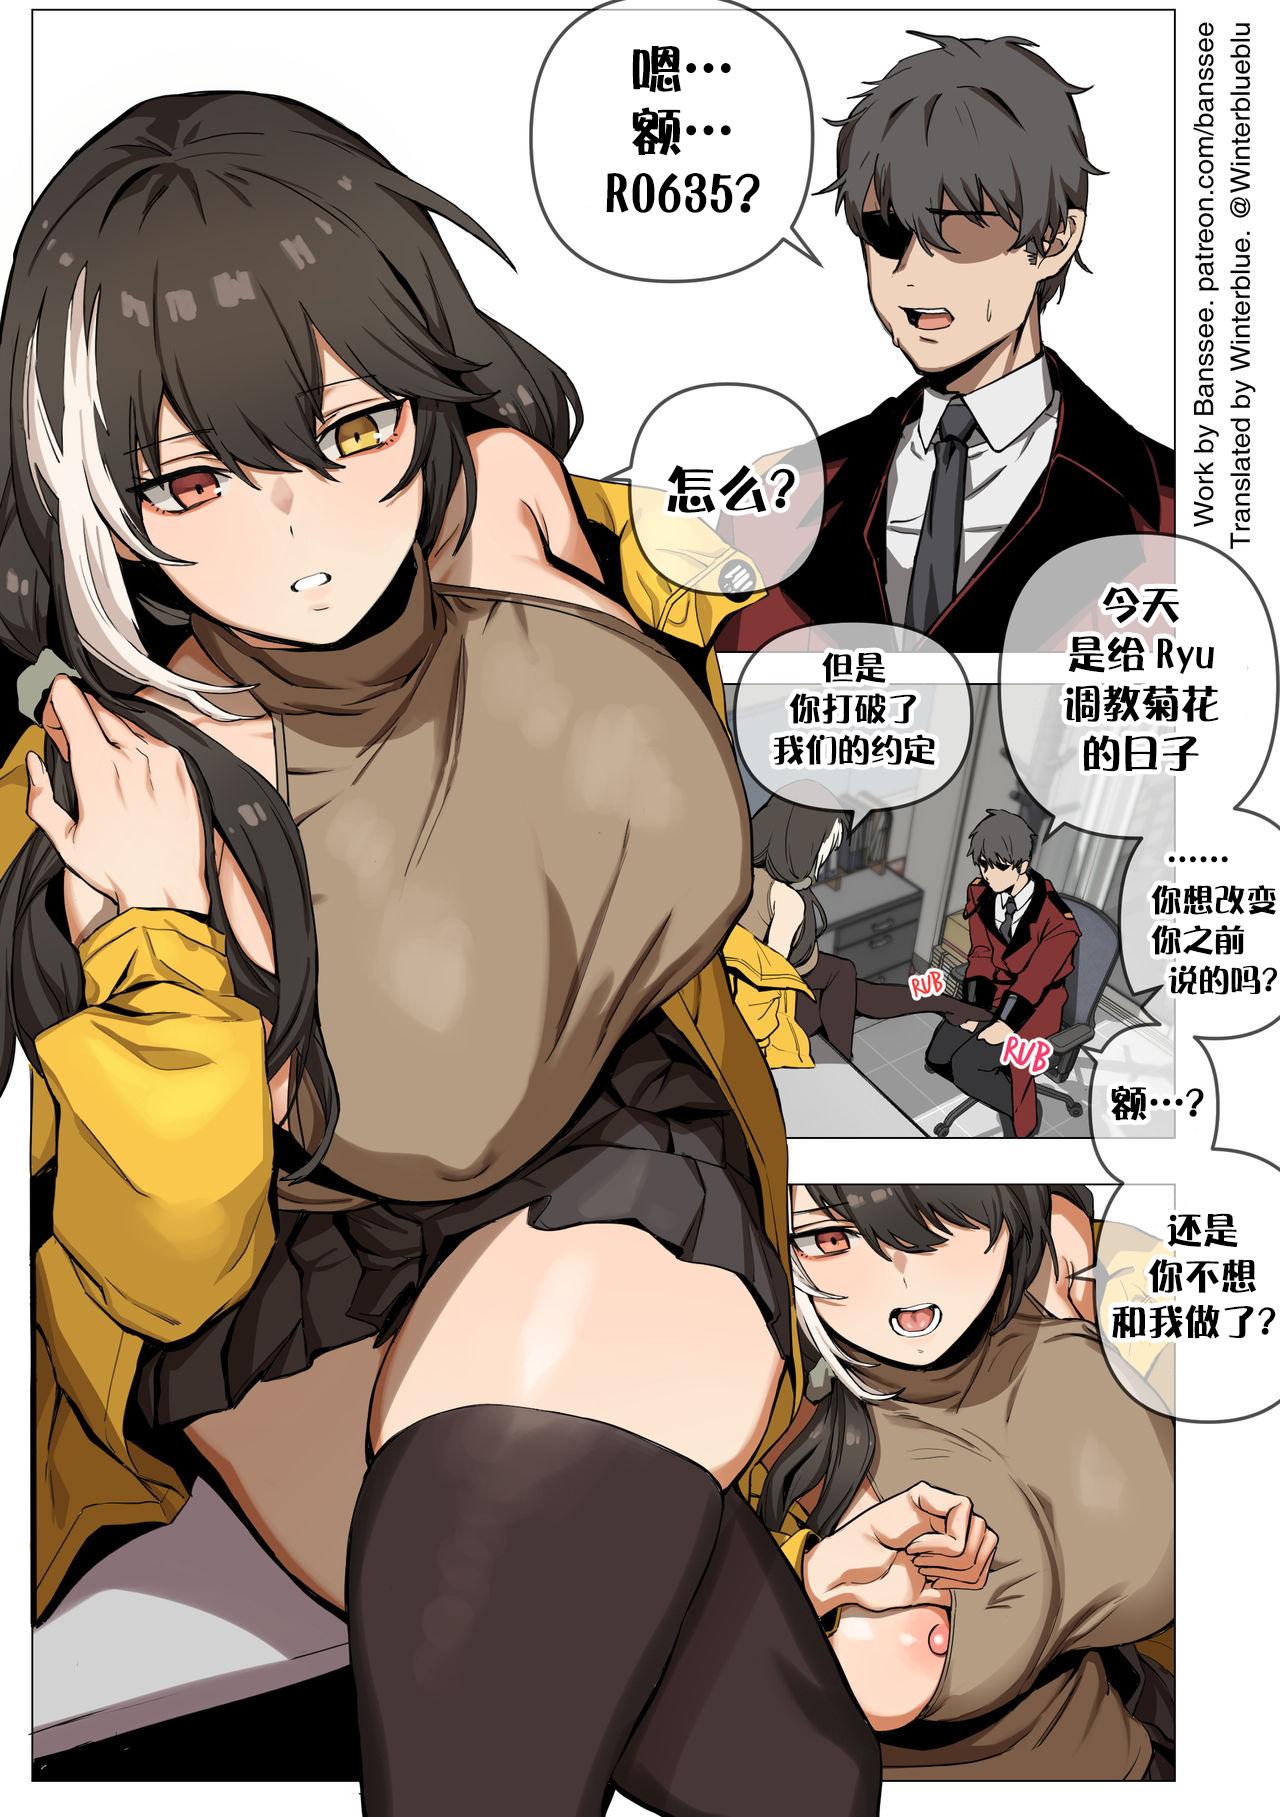 Titfuck RO635 - Girls frontline Two - Picture 1